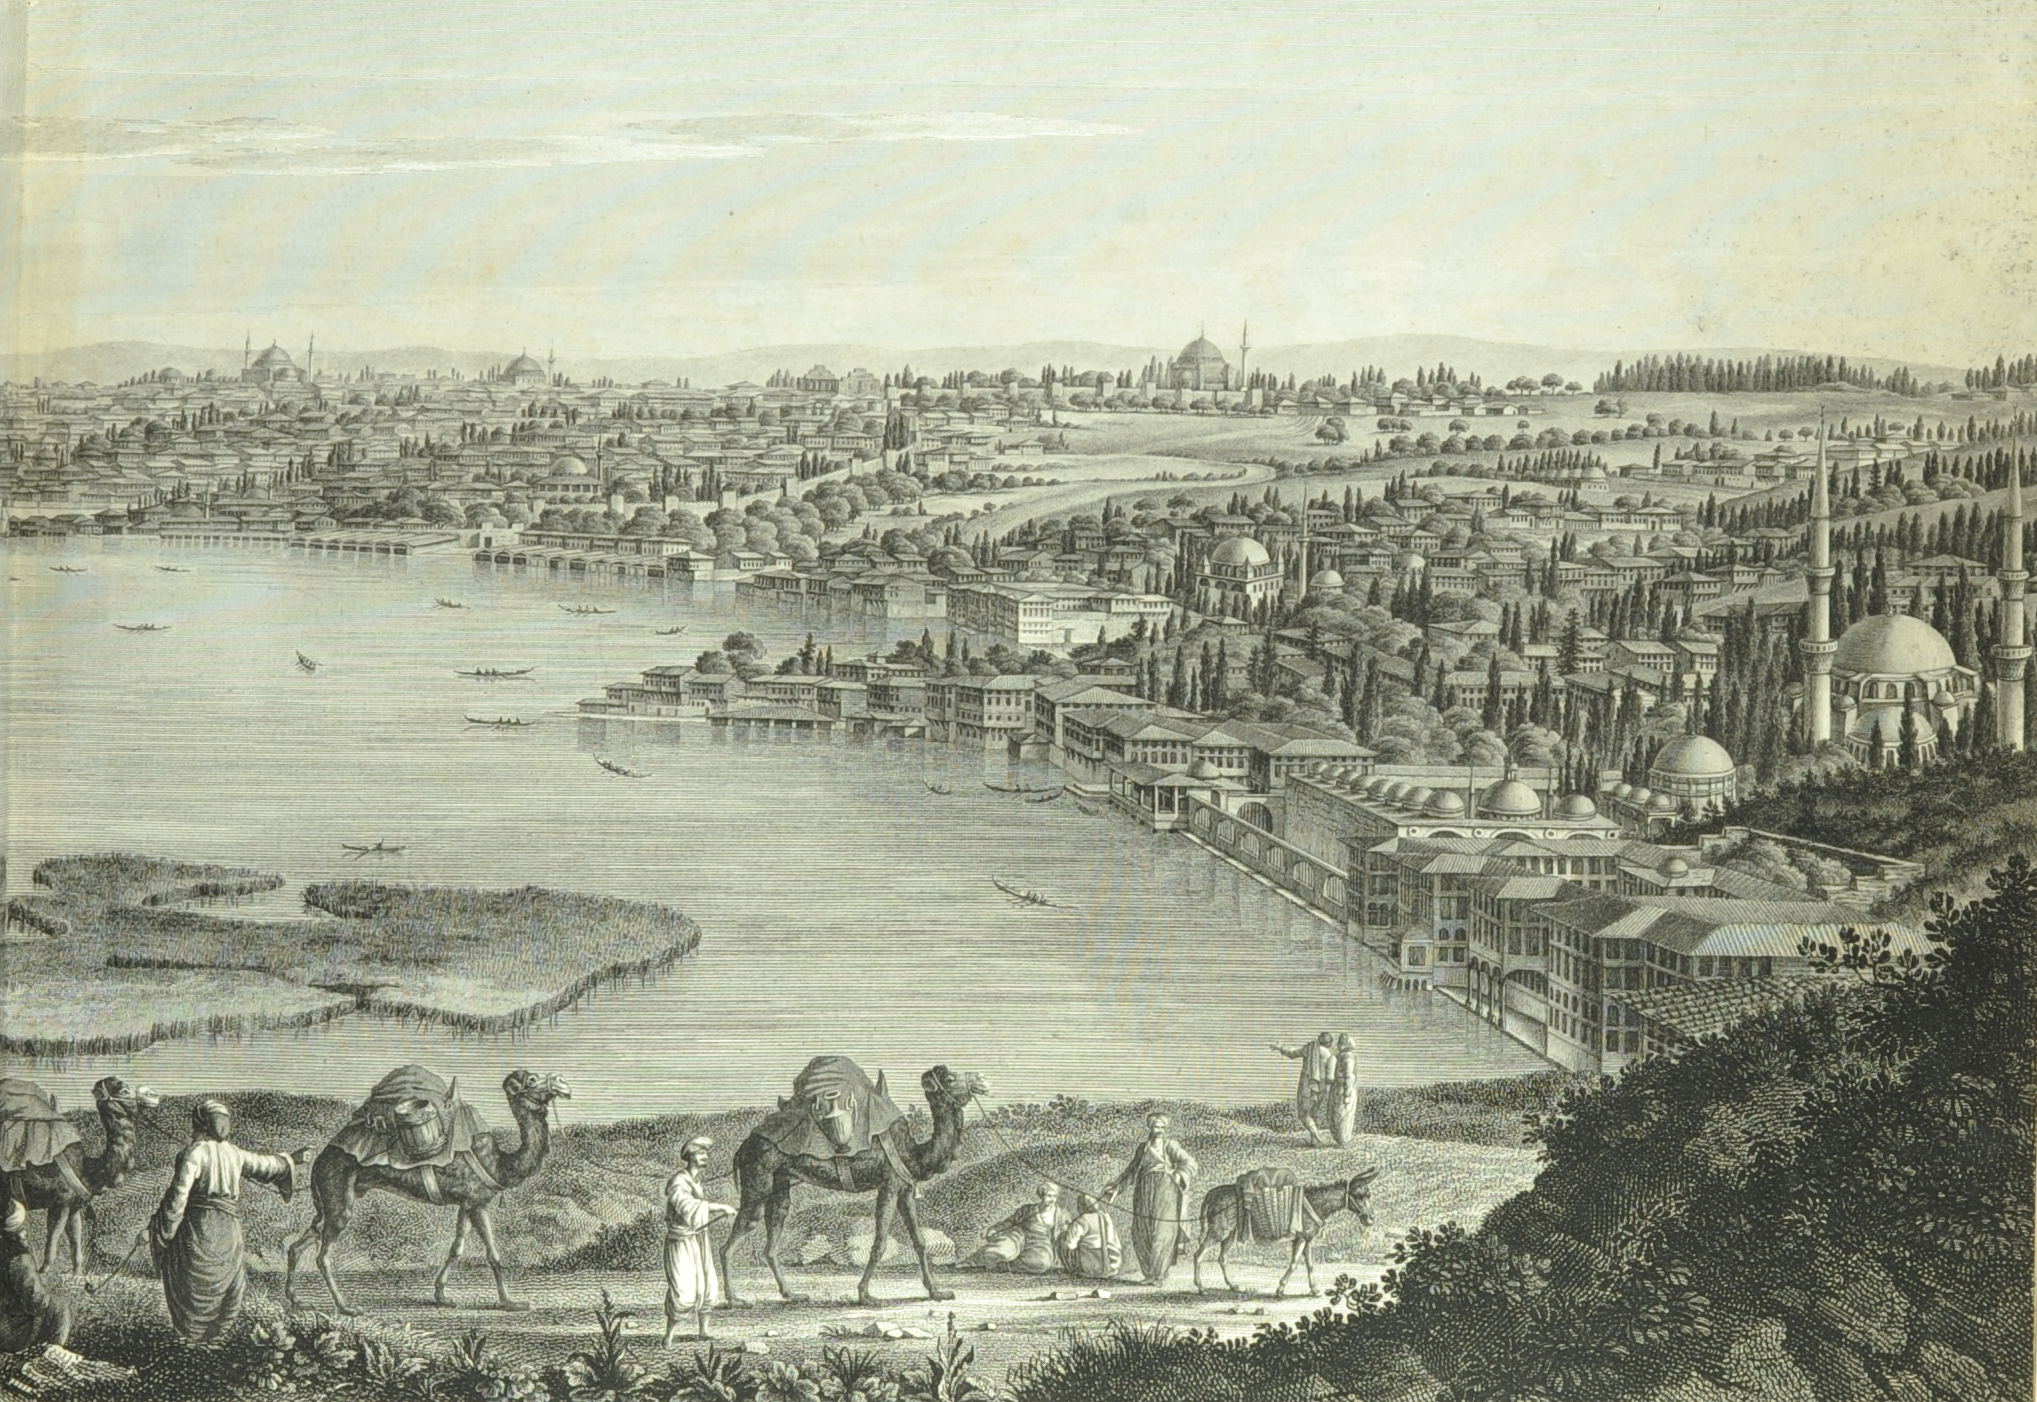 A view of Constantinople from plate 5 of Antoine Melling's Voyage pittoresque de Constantinople et des rives du Bosphore (St Andrews copy at rfx DR724.M4)  